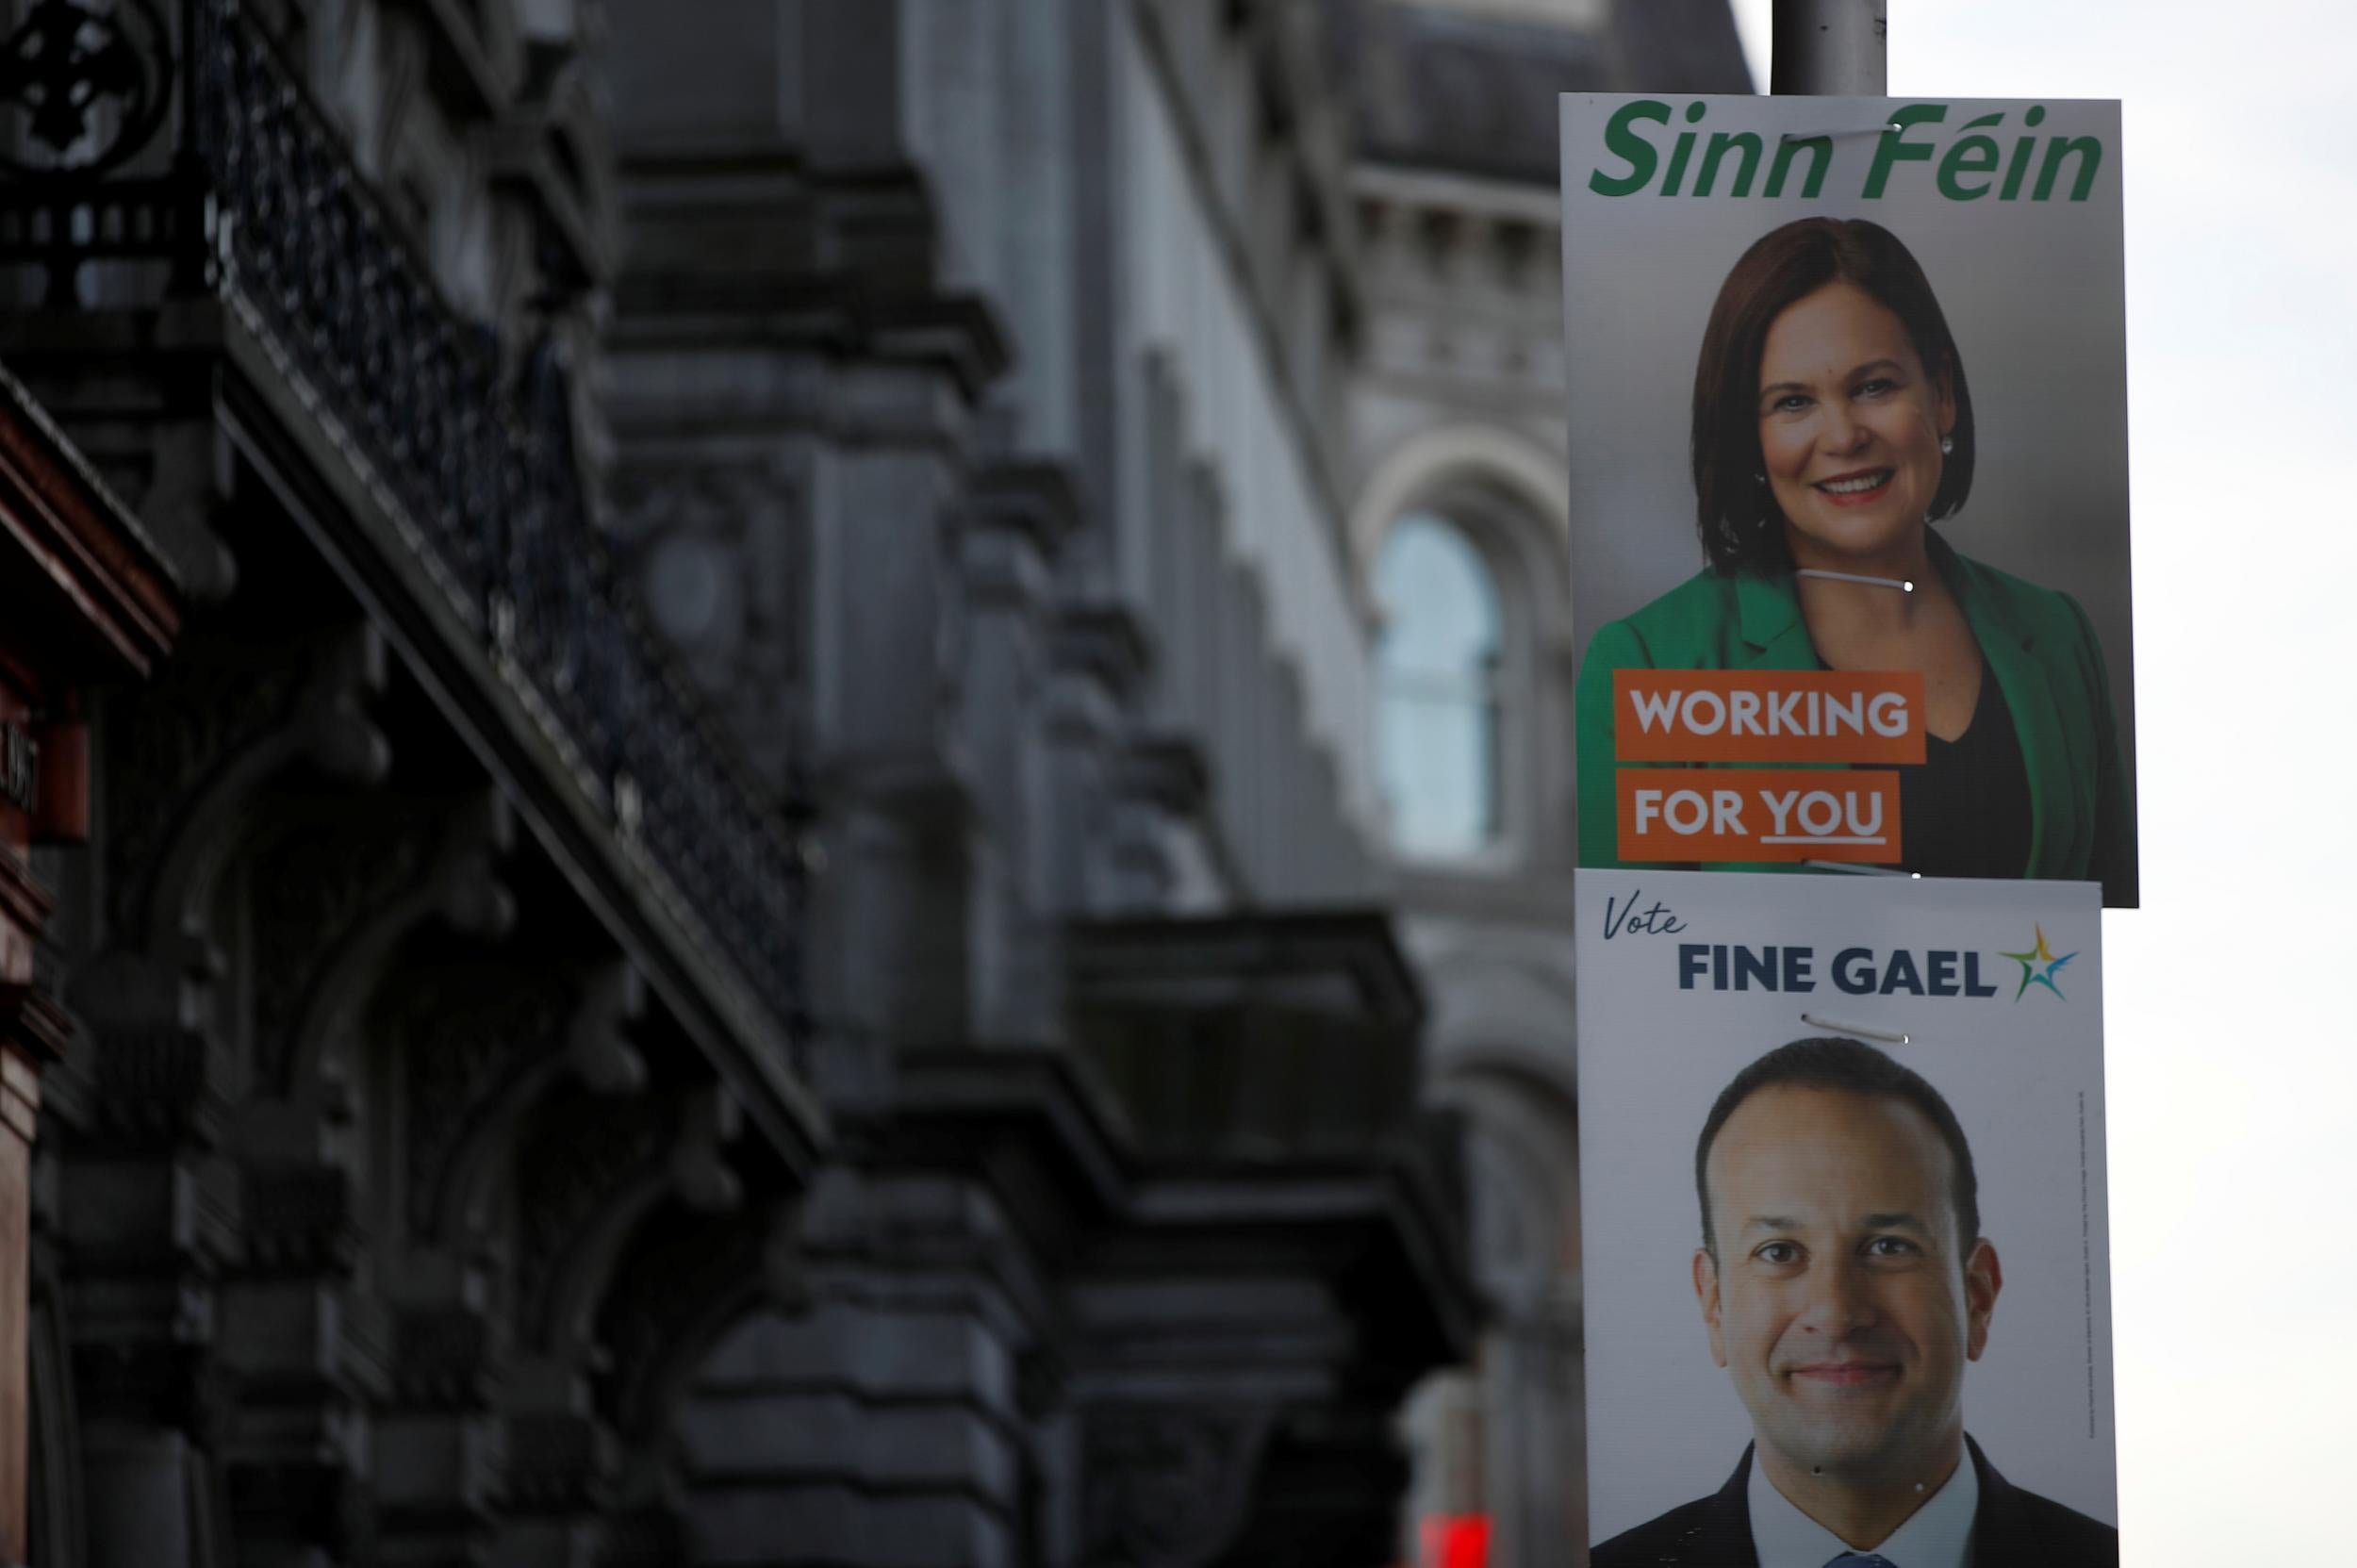 Sinn Fein leader Mary Lou McDonald’s election poster sits above that of Fine Gael leader Leo Varadkar in central Dublin (Reuters)